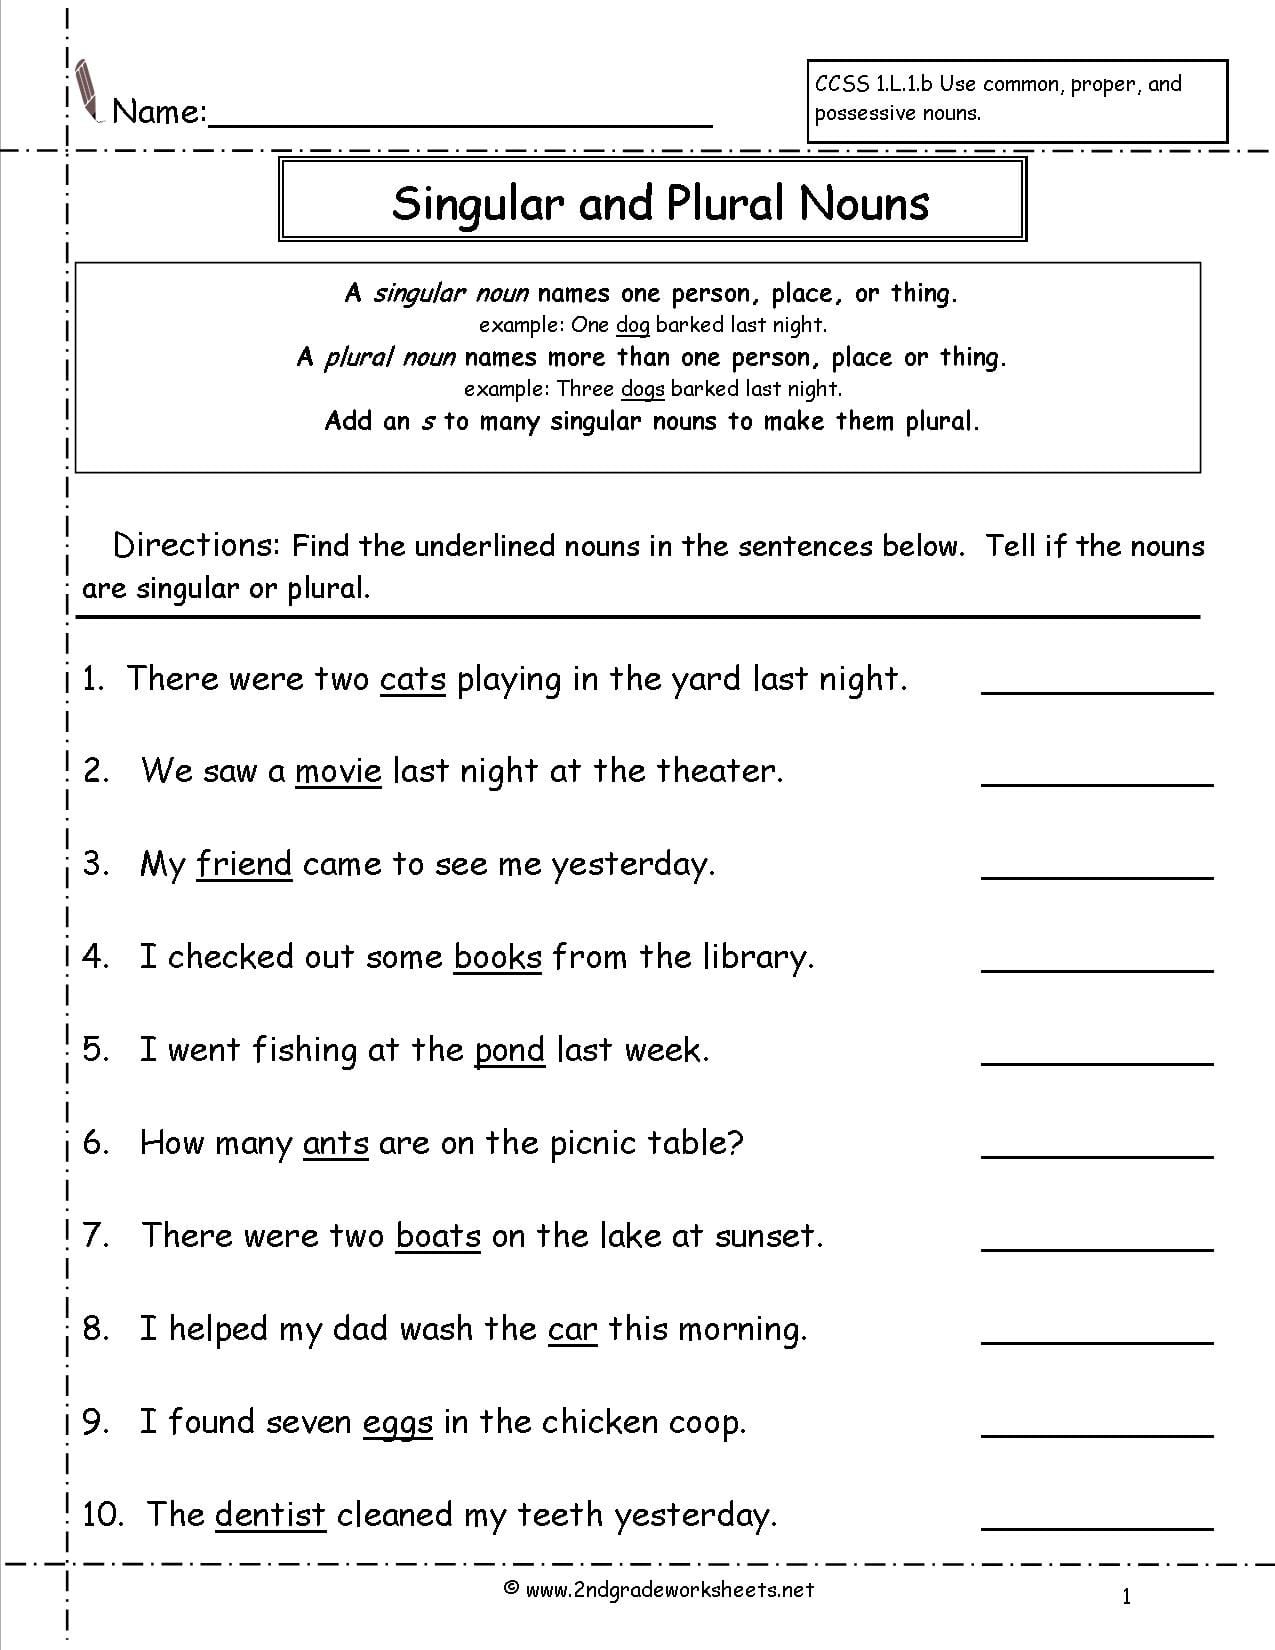 20-best-images-of-abbreviations-worksheets-7th-grade-month-abbreviations-worksheets-states